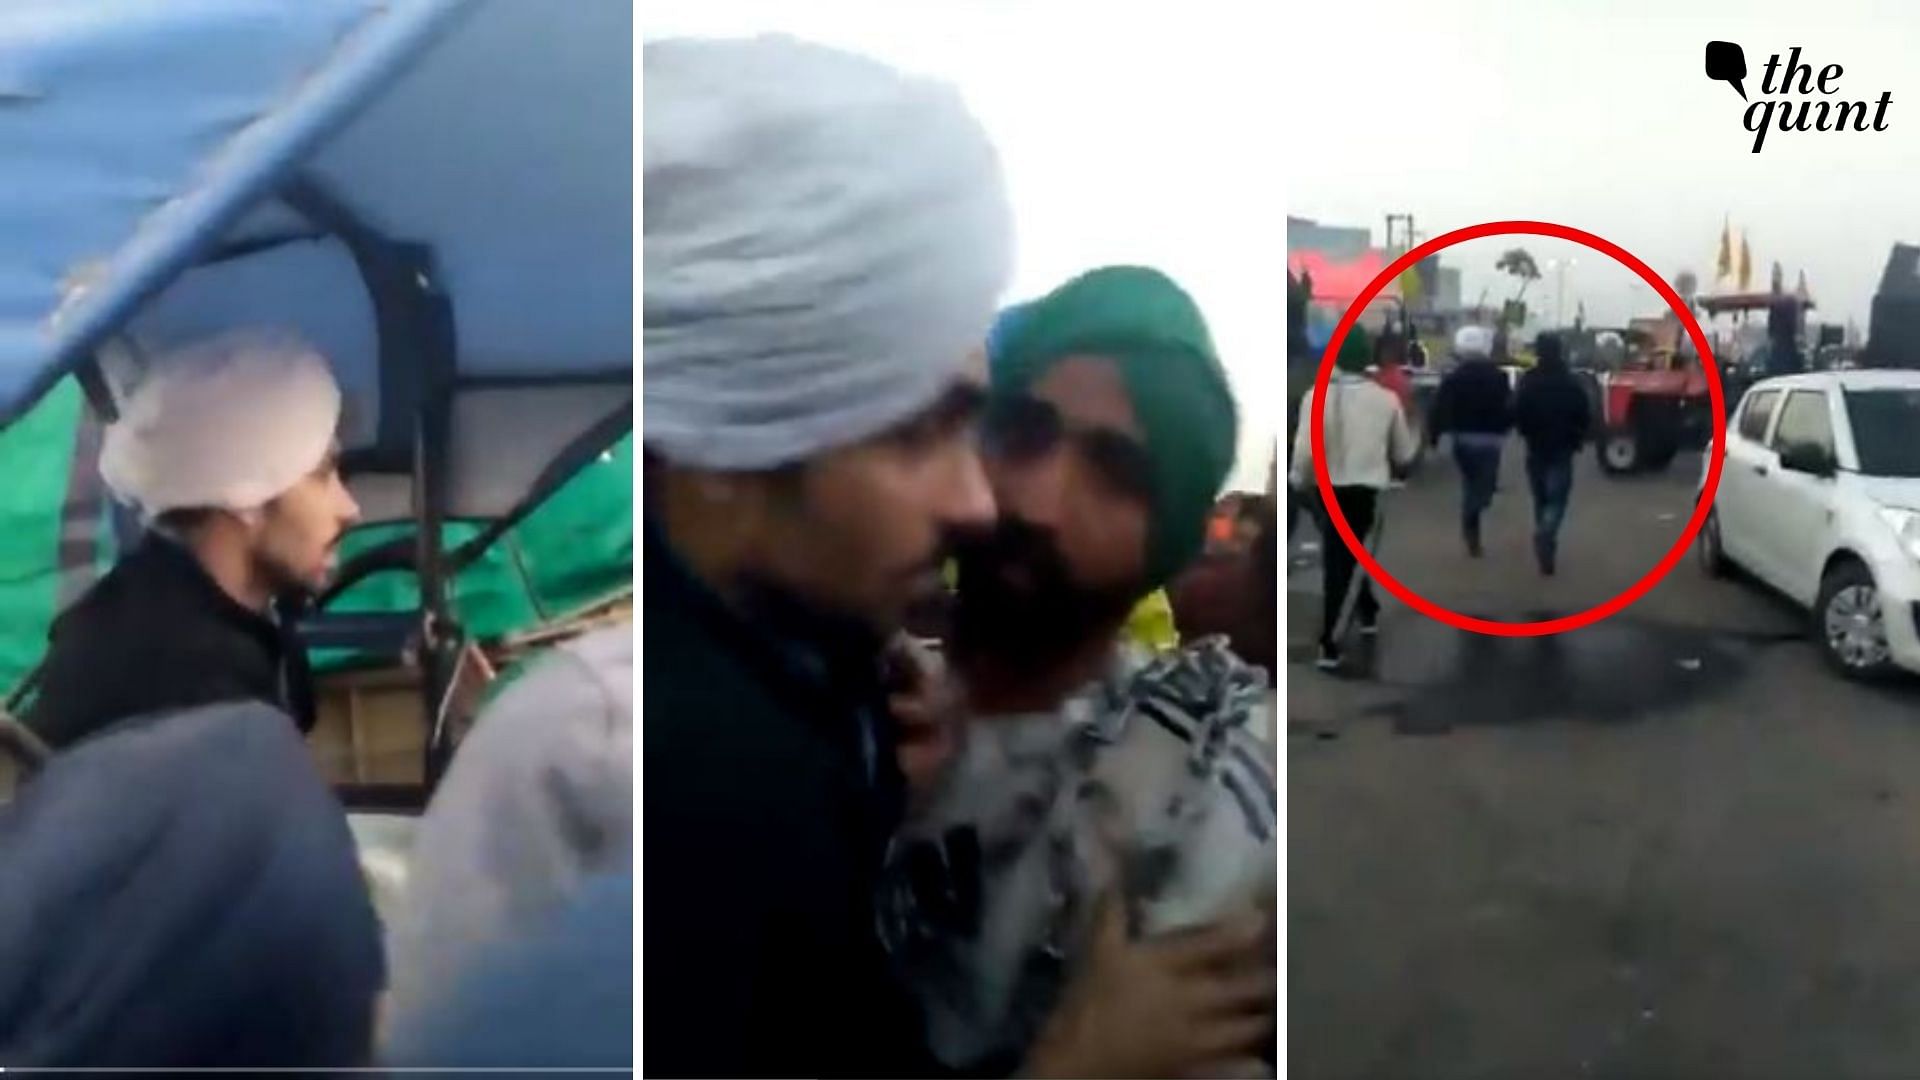 In the 1.05 minute clip that’s being widely shared, Deep Sidhu can be seen being confronted by a group of farmers while he was making a video sitting on a tractor. Sidhu then jumps off the tractor and is chased by the farmers.